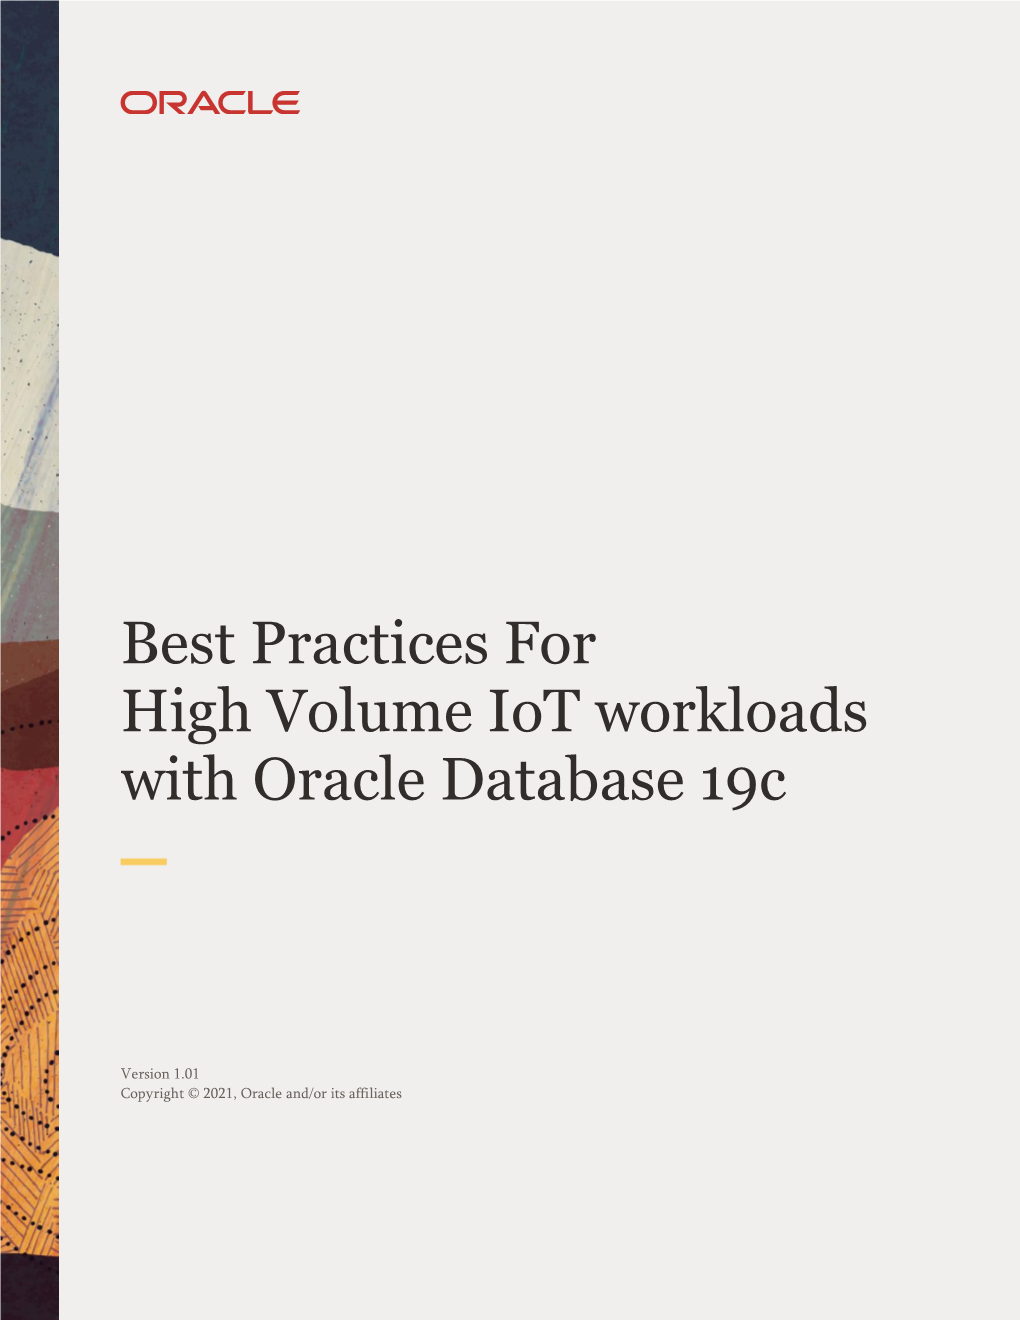 Best Practices for High Volume Iot Workloads with Oracle Database 19C